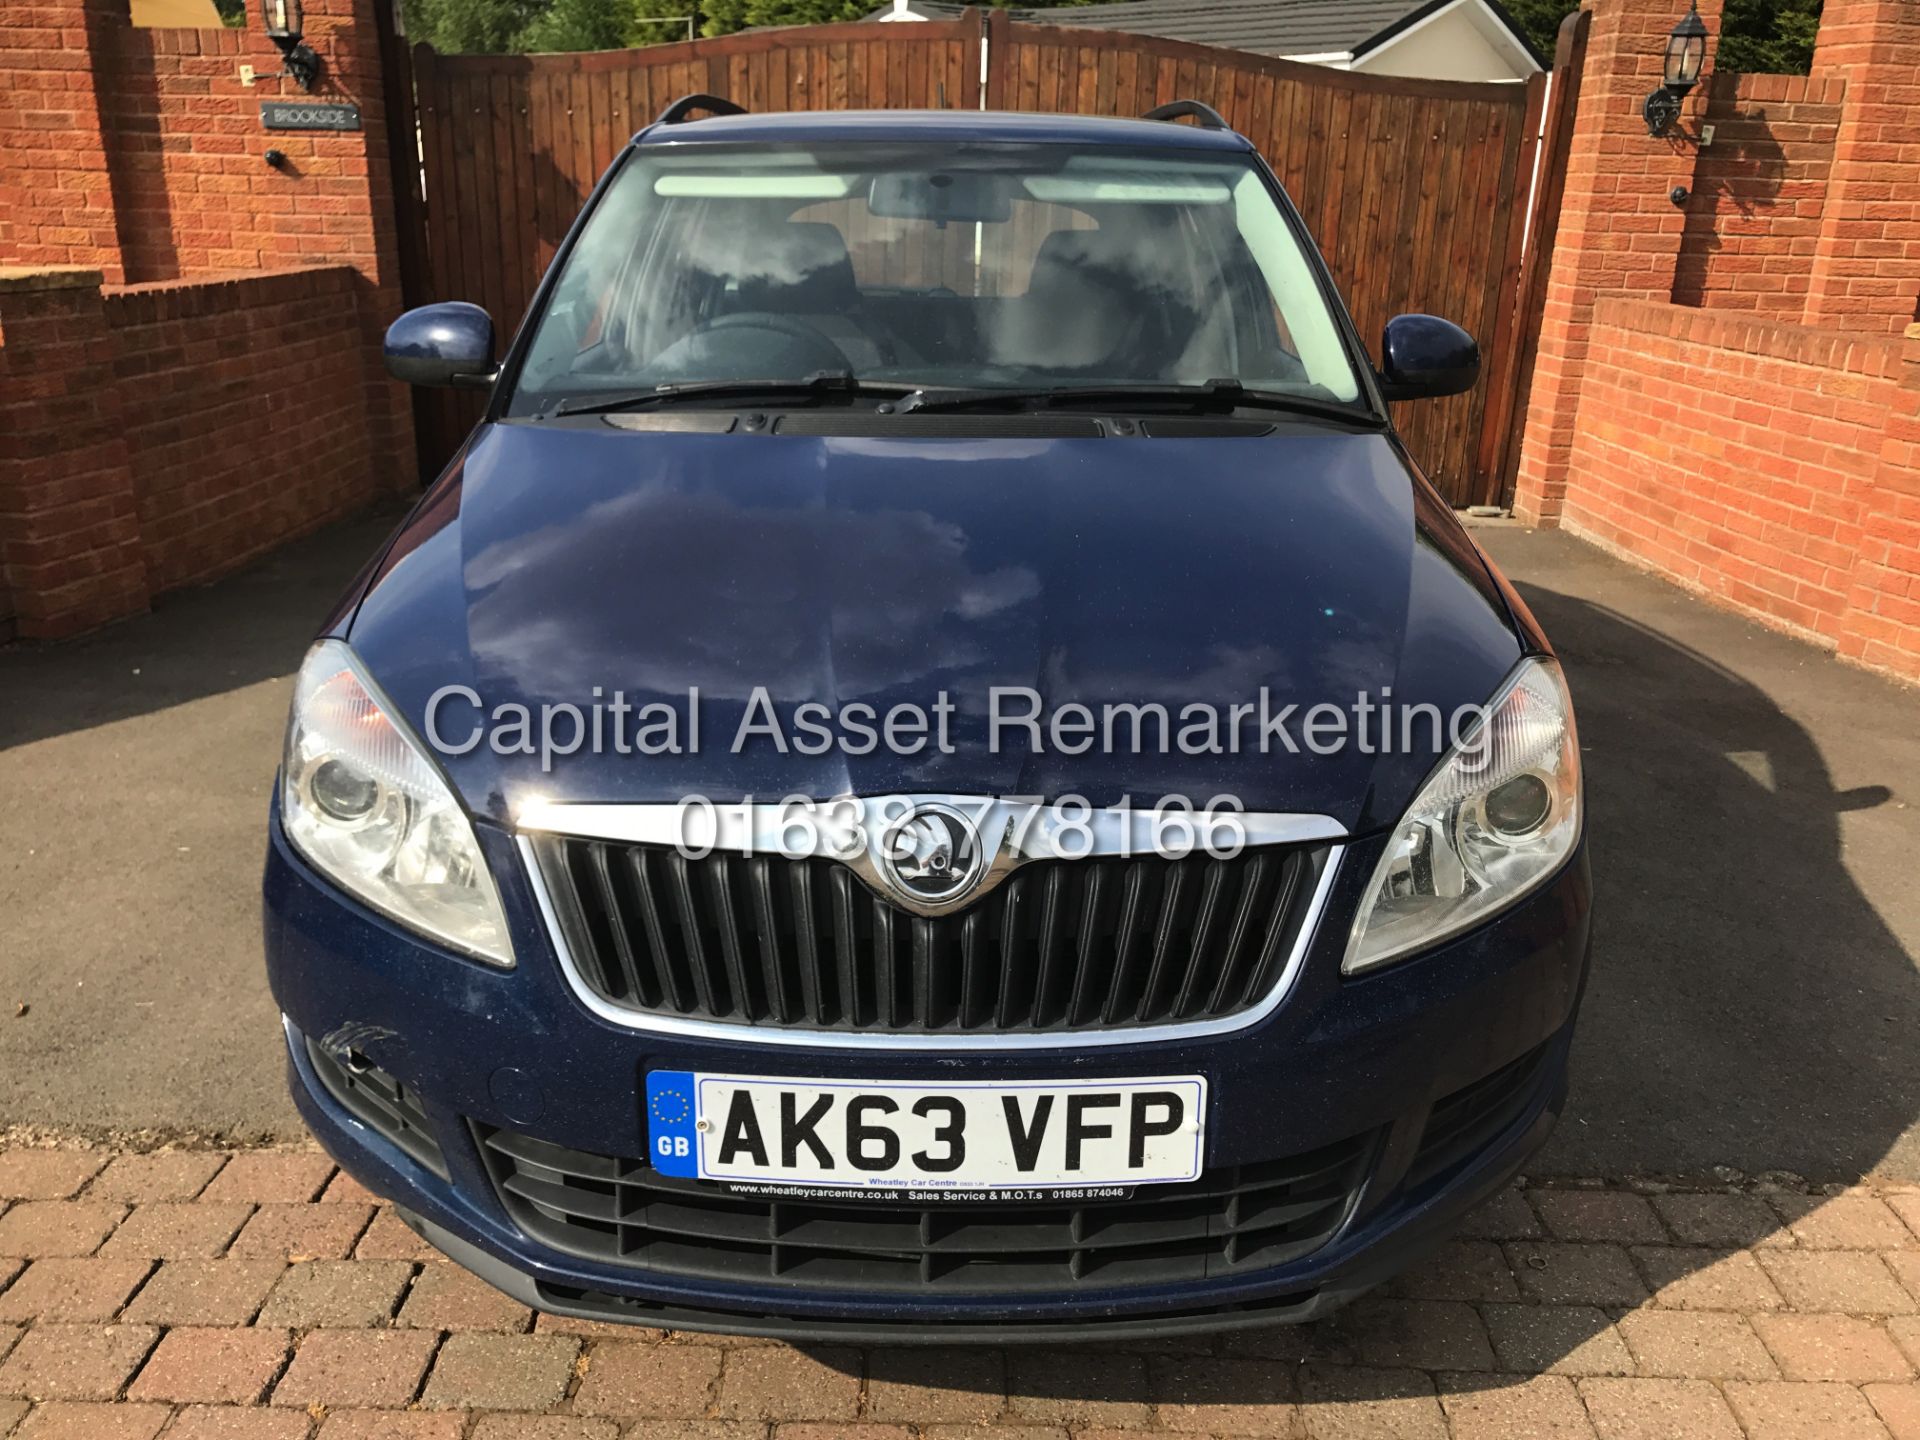 SKODA FABIA 1.6TDI "SE - ESTATE" NEW SHAPE (2014 YEAR) AIR CON - ALLOYS - ELEC PACK *NO VAT TO PAY* - Image 2 of 17